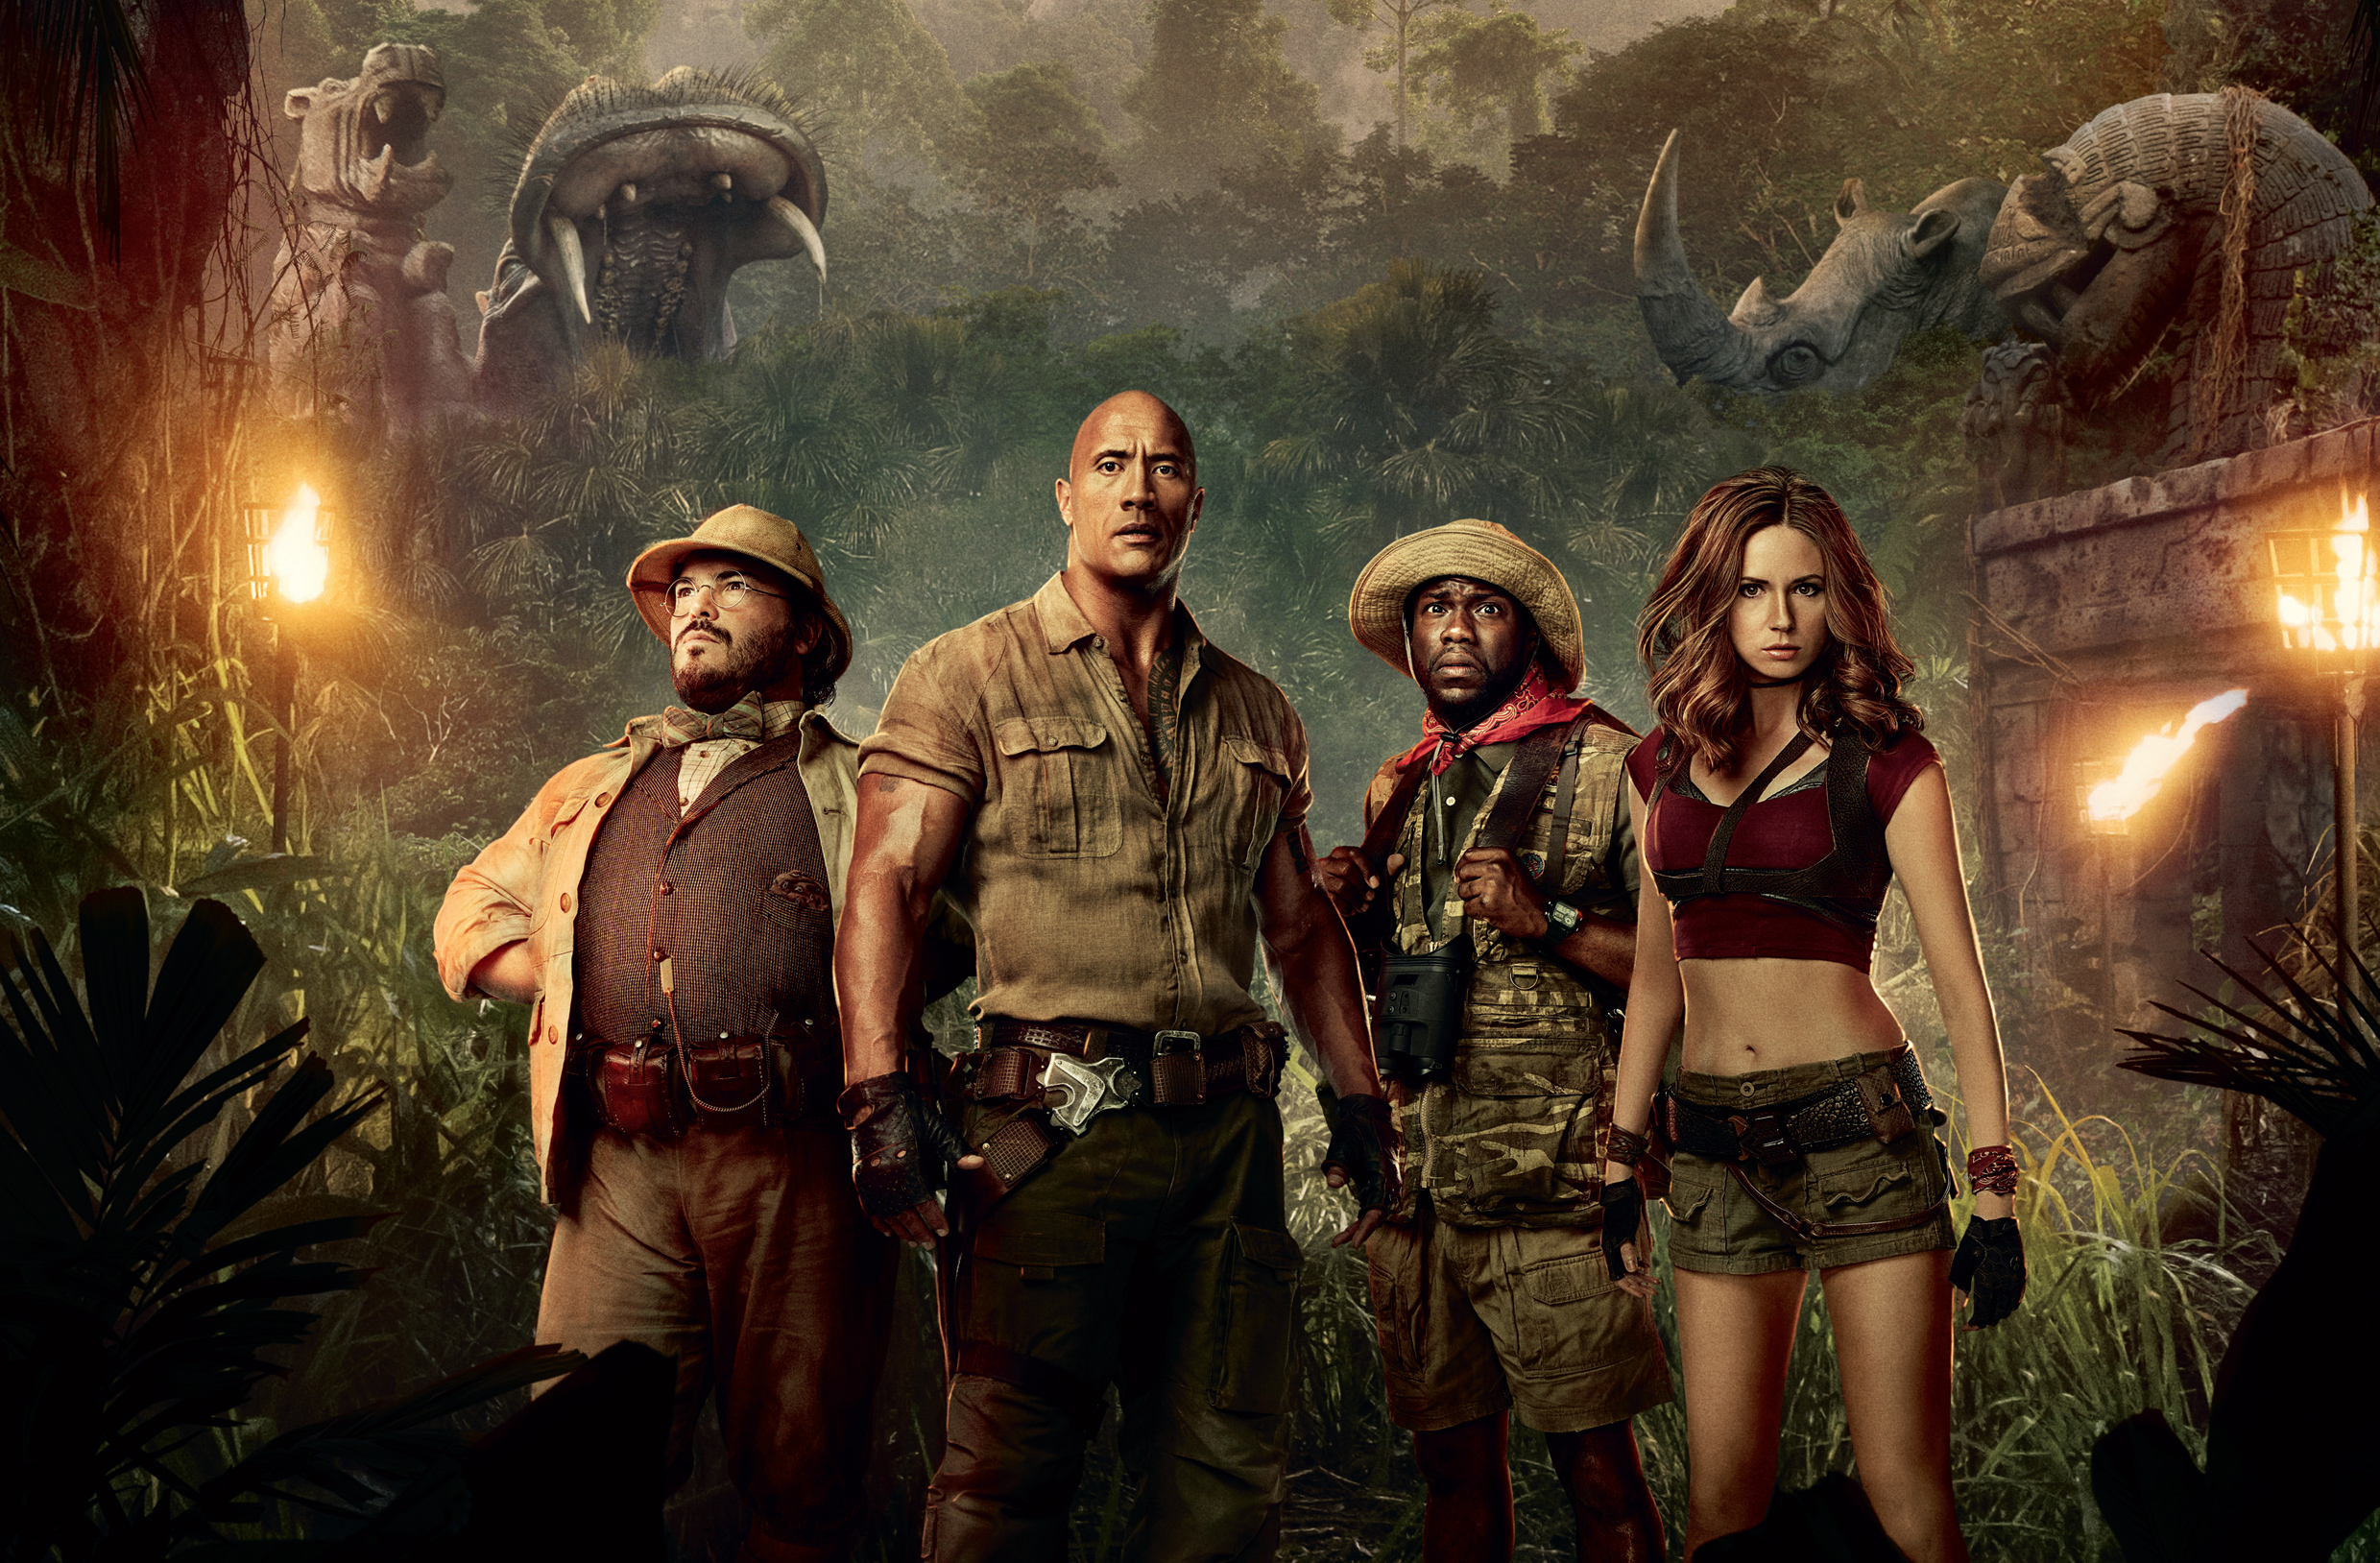 download the new for mac Jumanji: Welcome to the Jungle